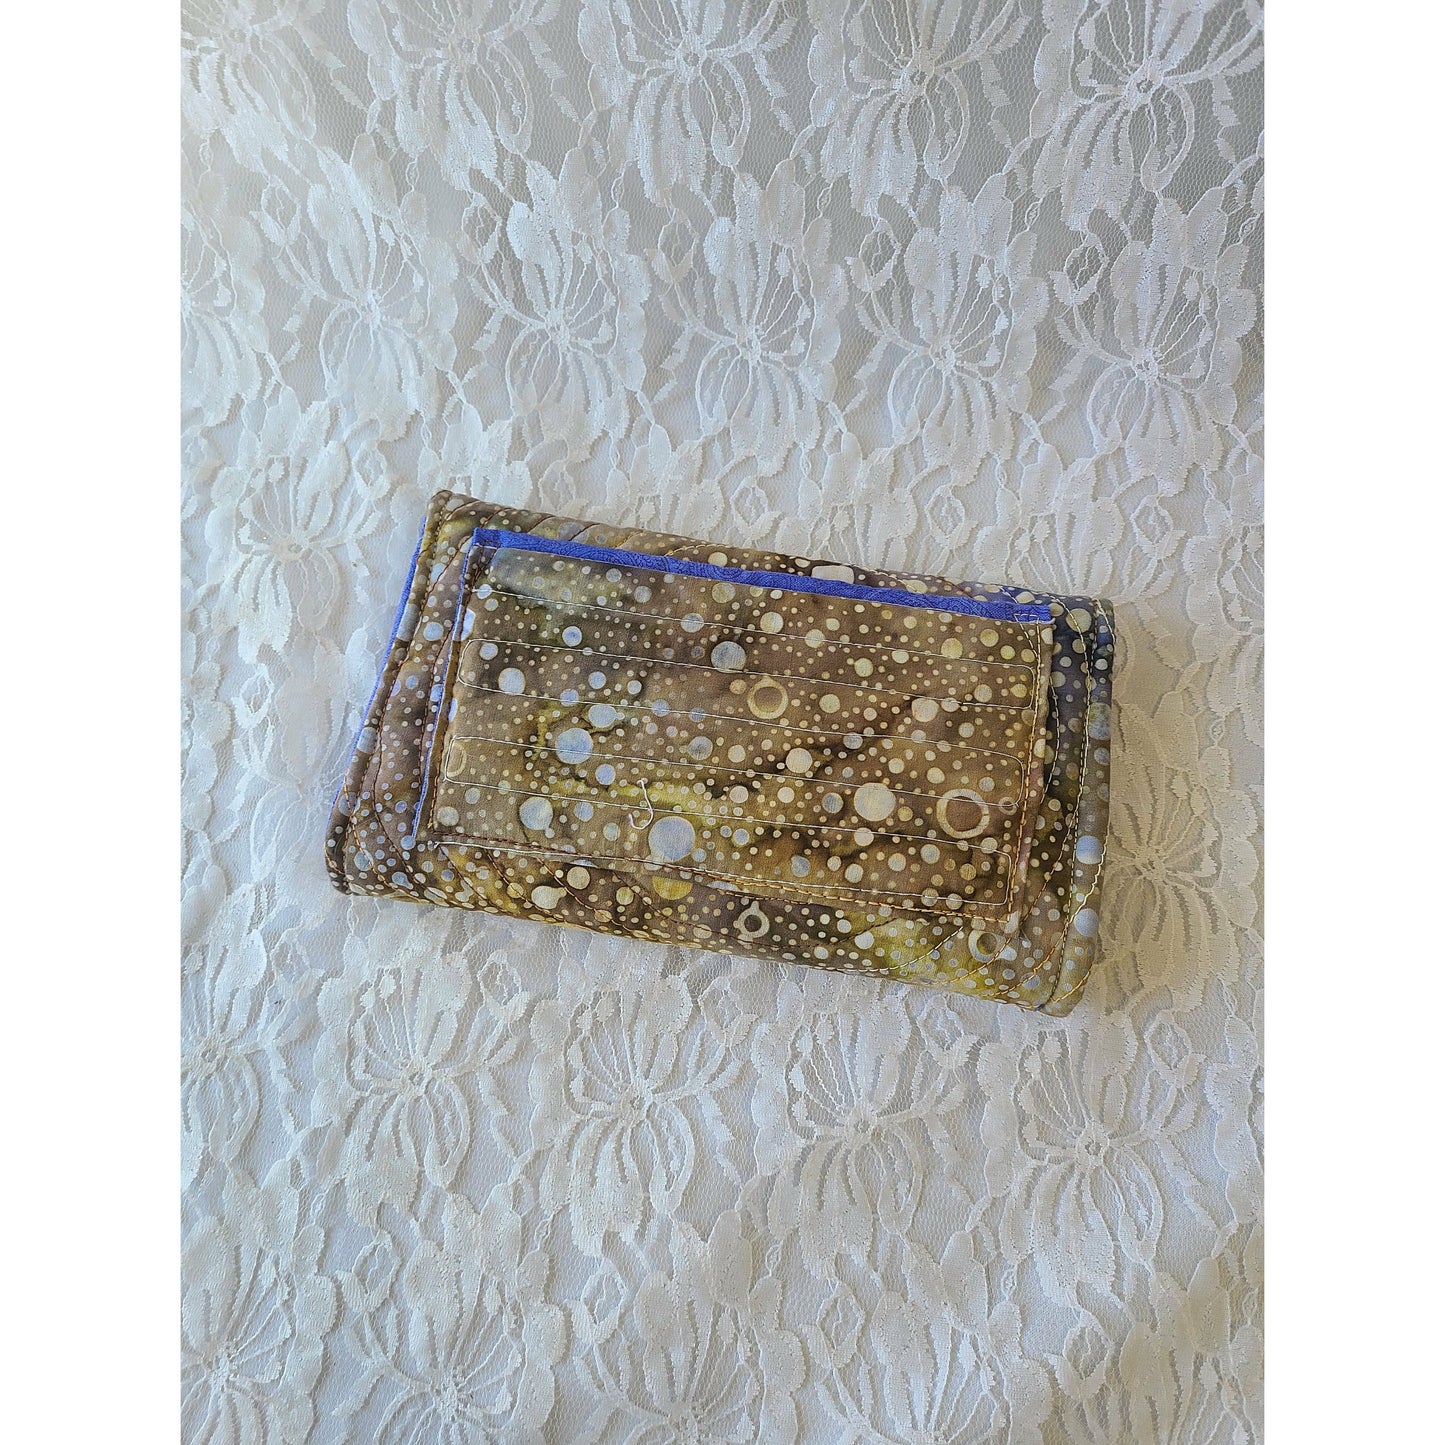 Handmade Wallet ~ Sewn & Quilted ~ Holds Cards, Checkbook, Zippered Compartment for Change and Clear Pocket for ID 